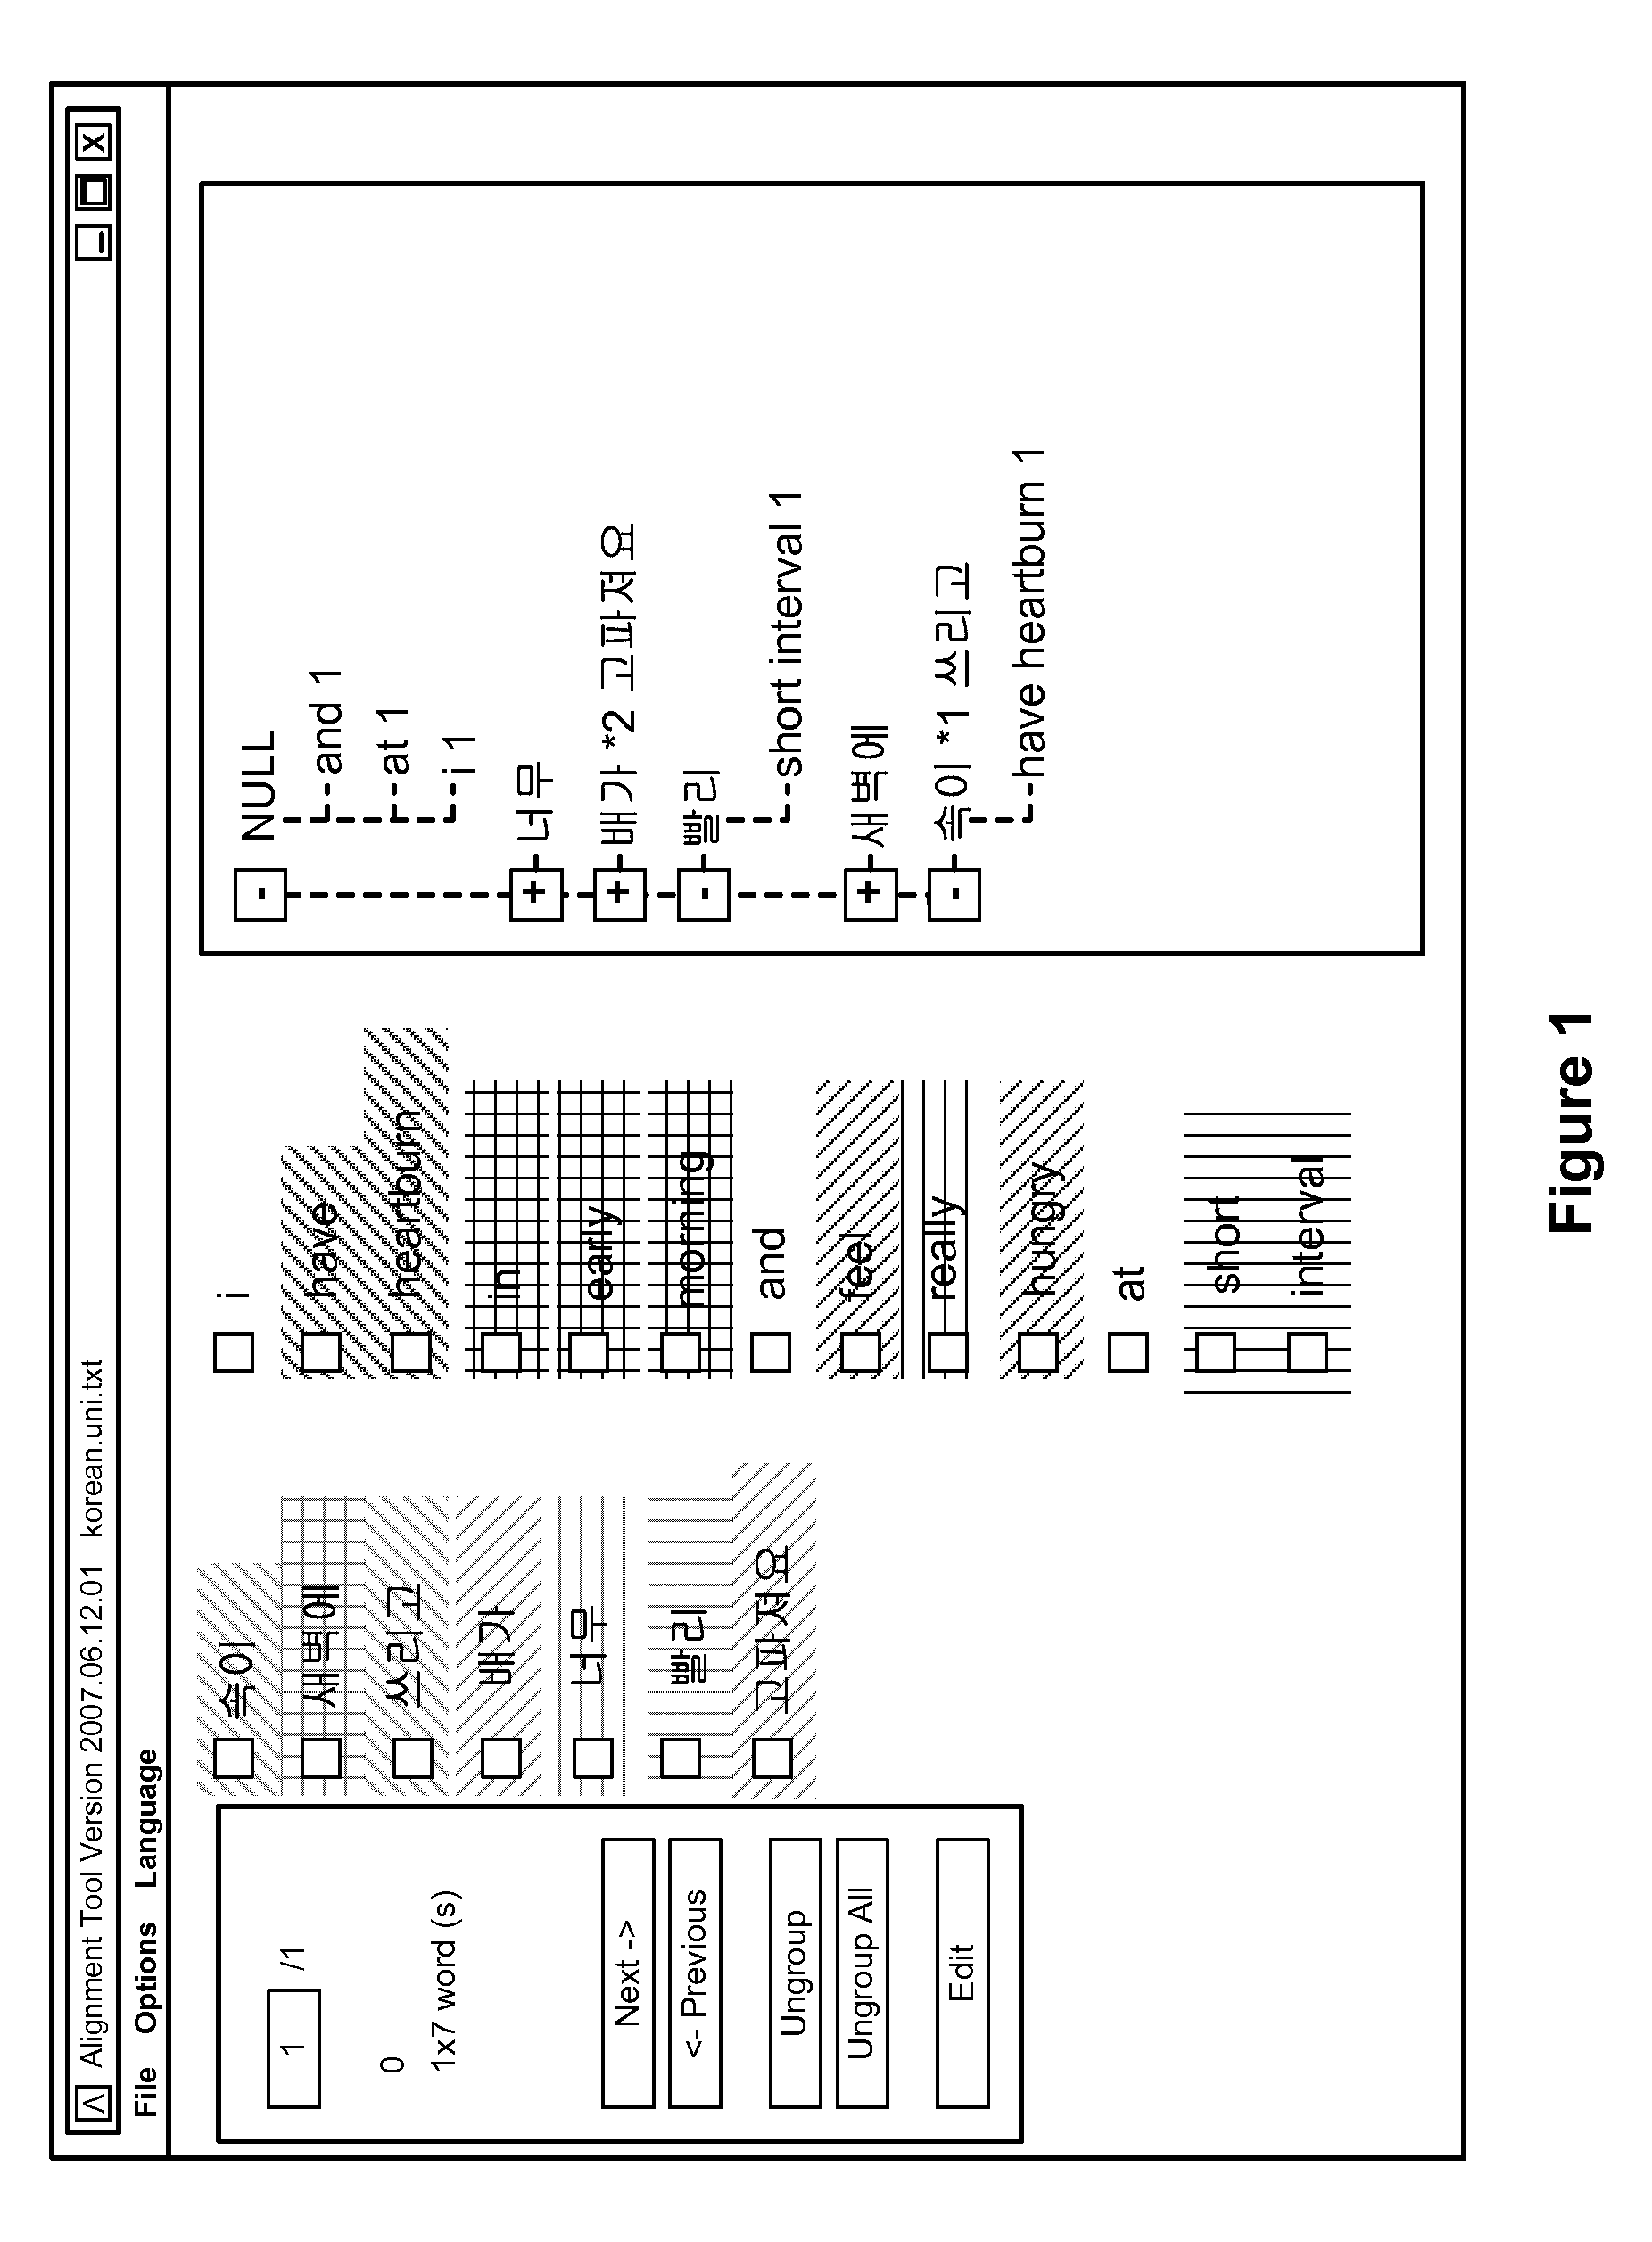 Methods for Using Manual Phrase Alignment Data to Generate Translation Models for Statistical Machine Translation